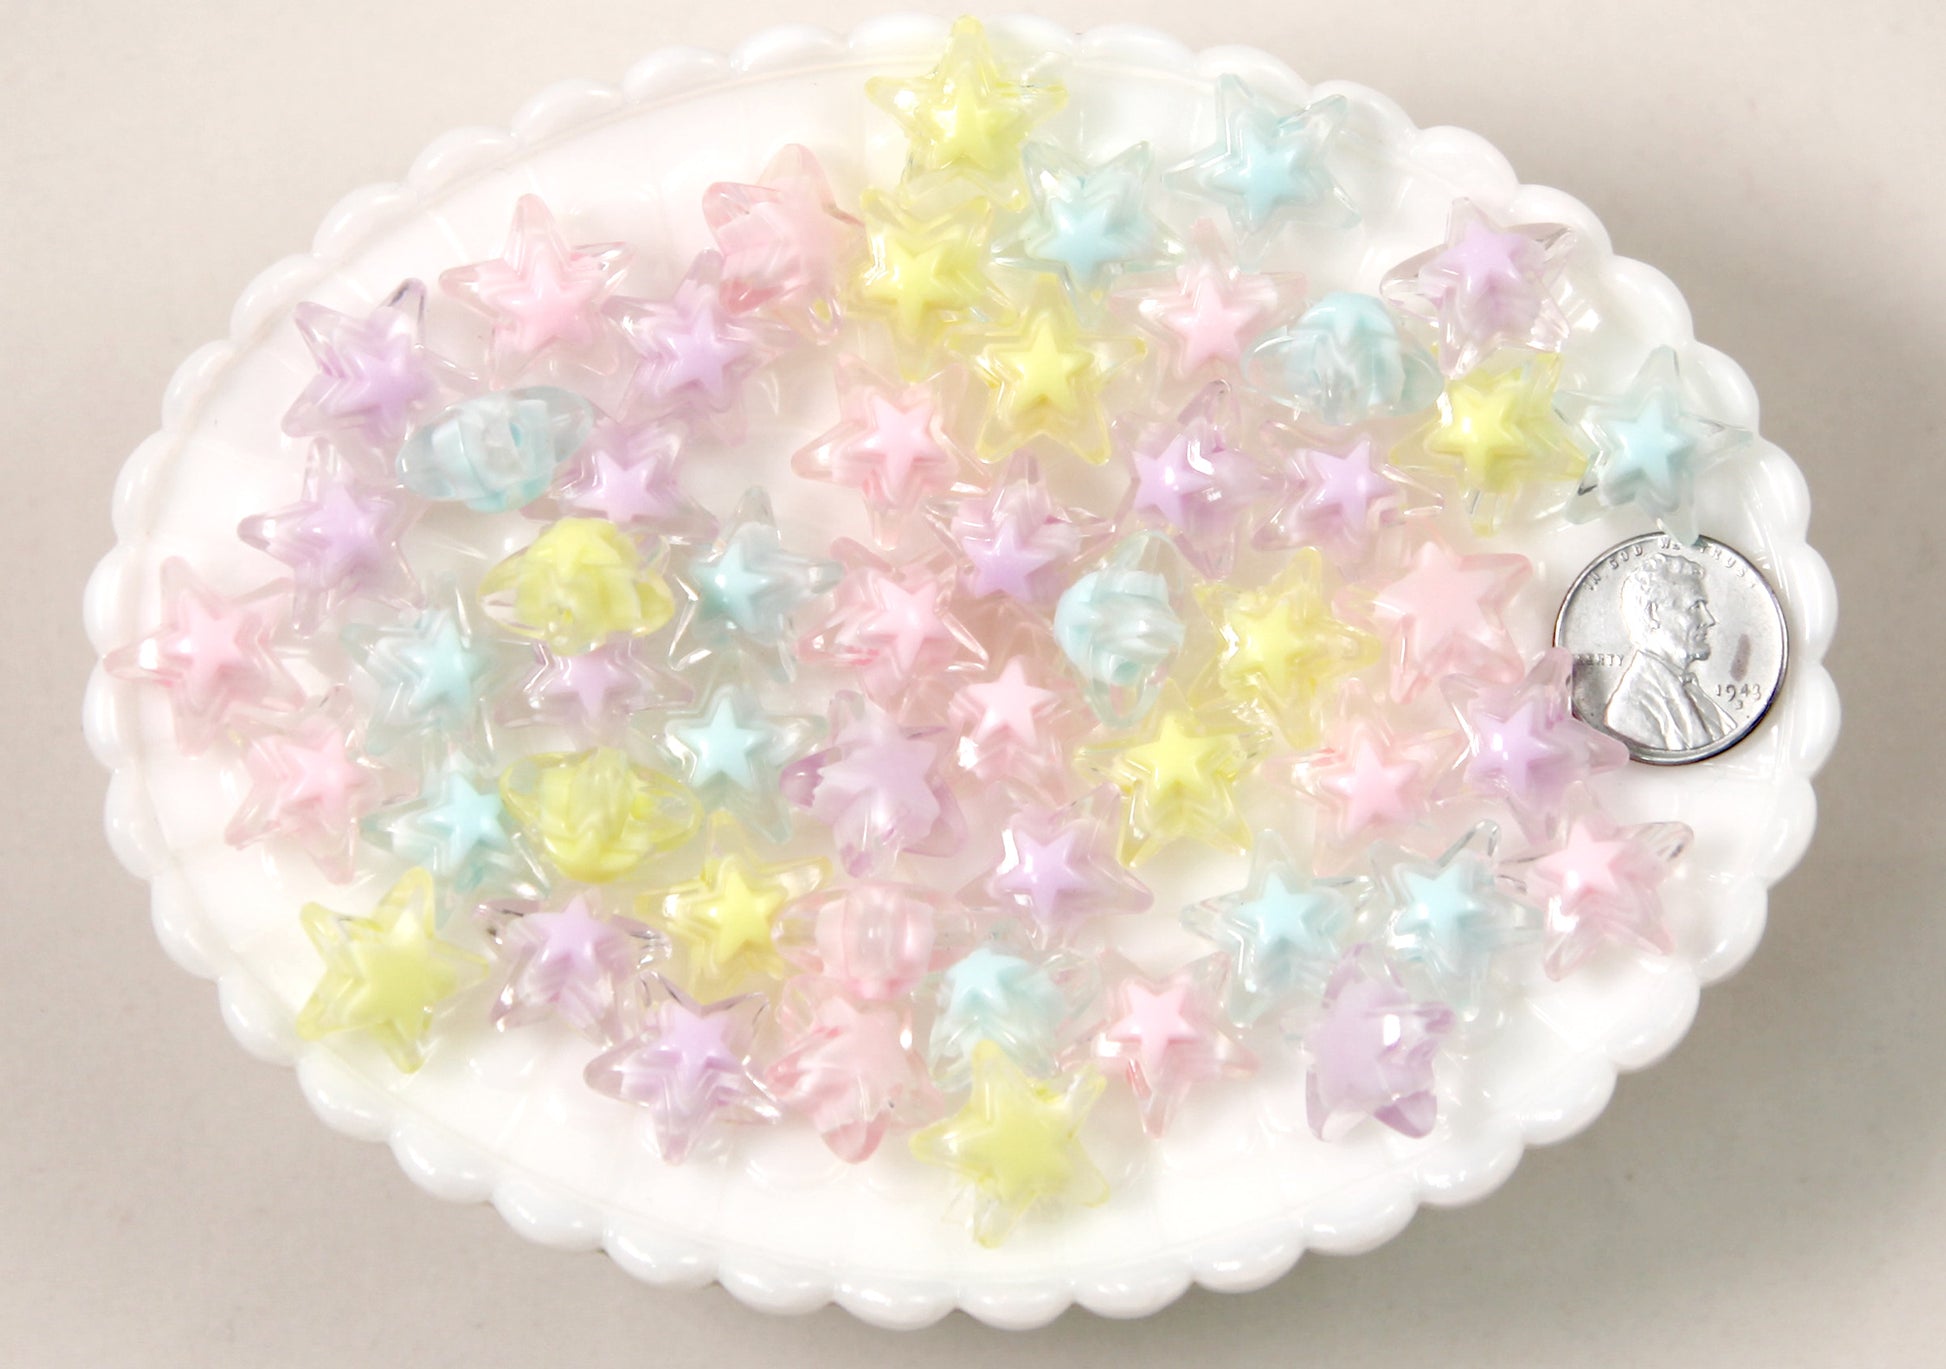 500 Imitation Pearl Beads in ABS Beads in the shape of a star, a